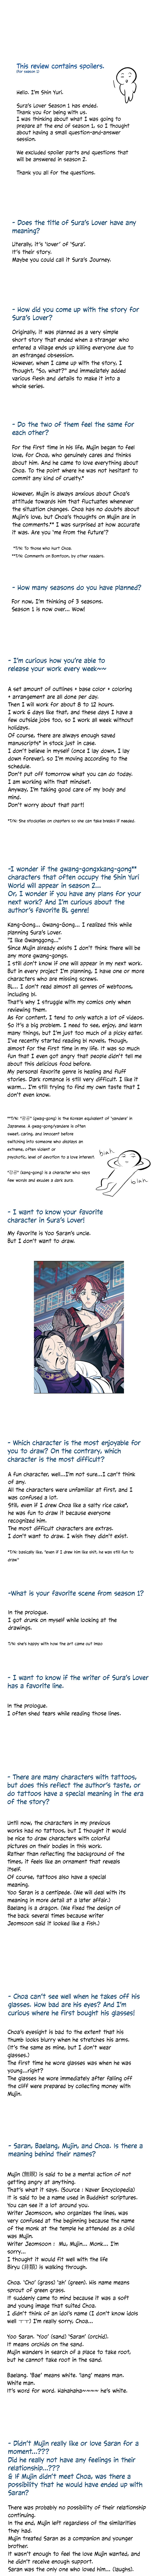 Sura's Lover Vol.1 Chapter 0 : Afterword. : Season 1. - Picture 2